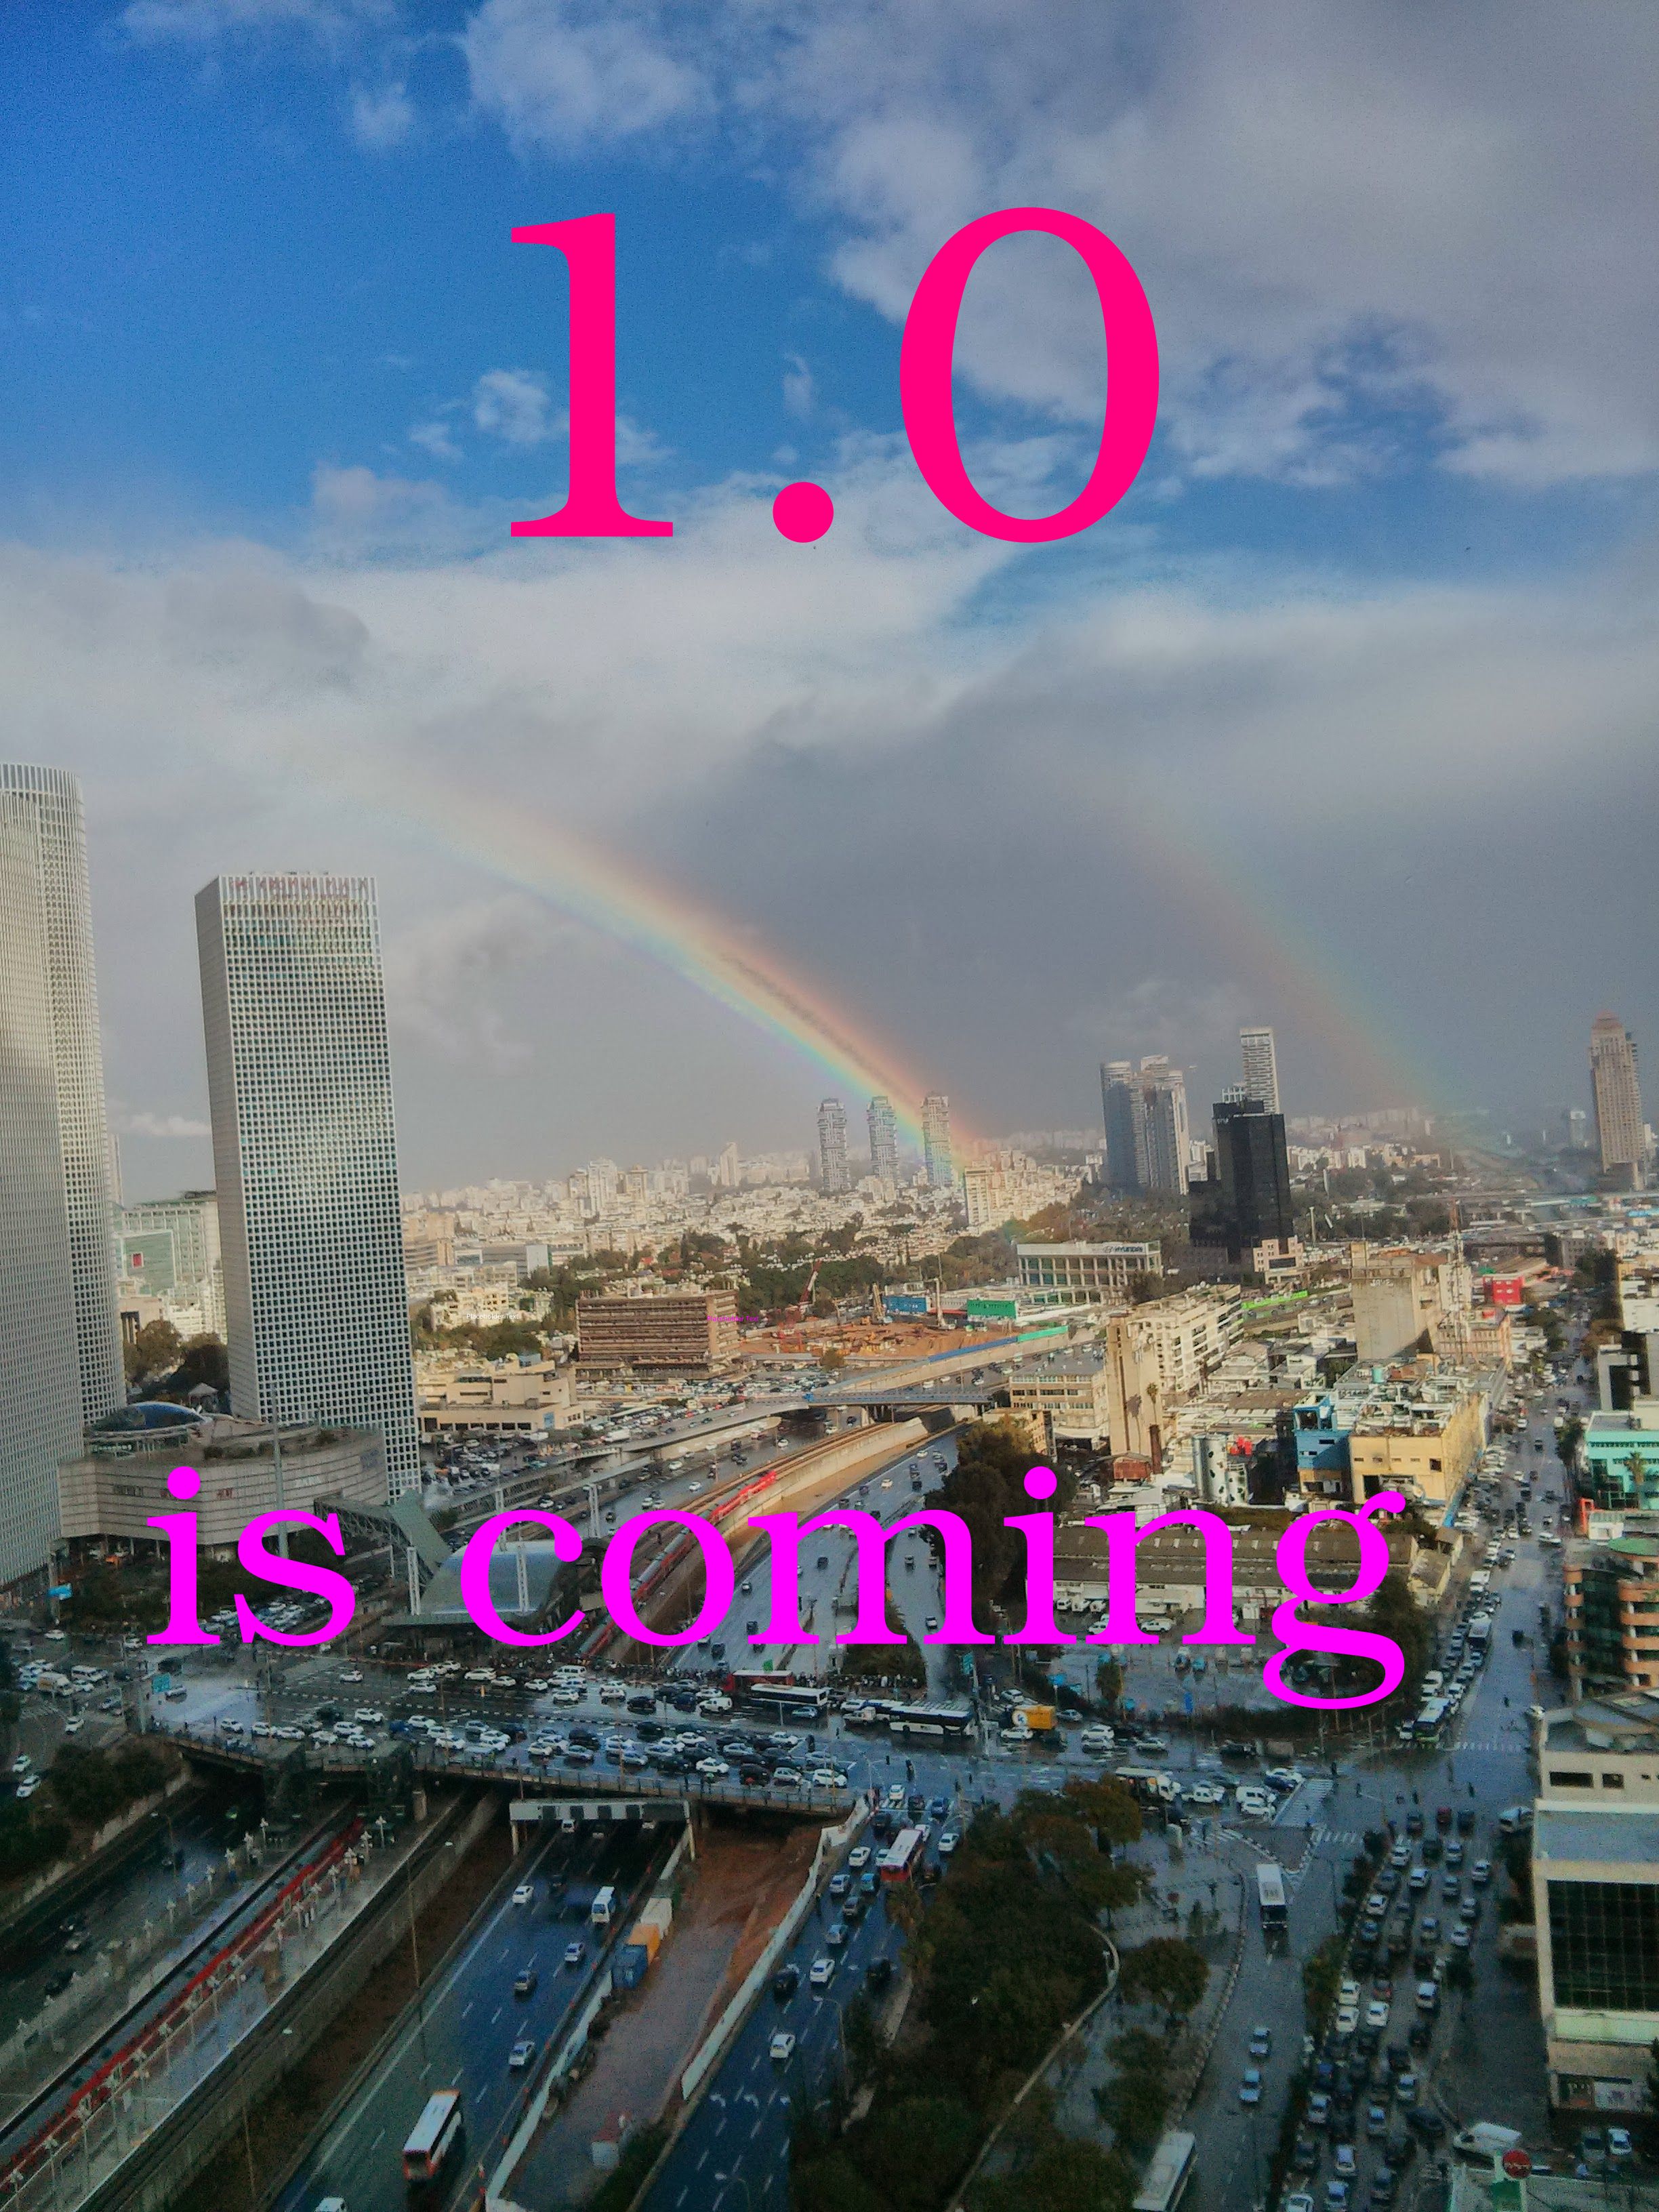 1.0 is coming: a double rainbow over a traffic jam in Tel Aviv